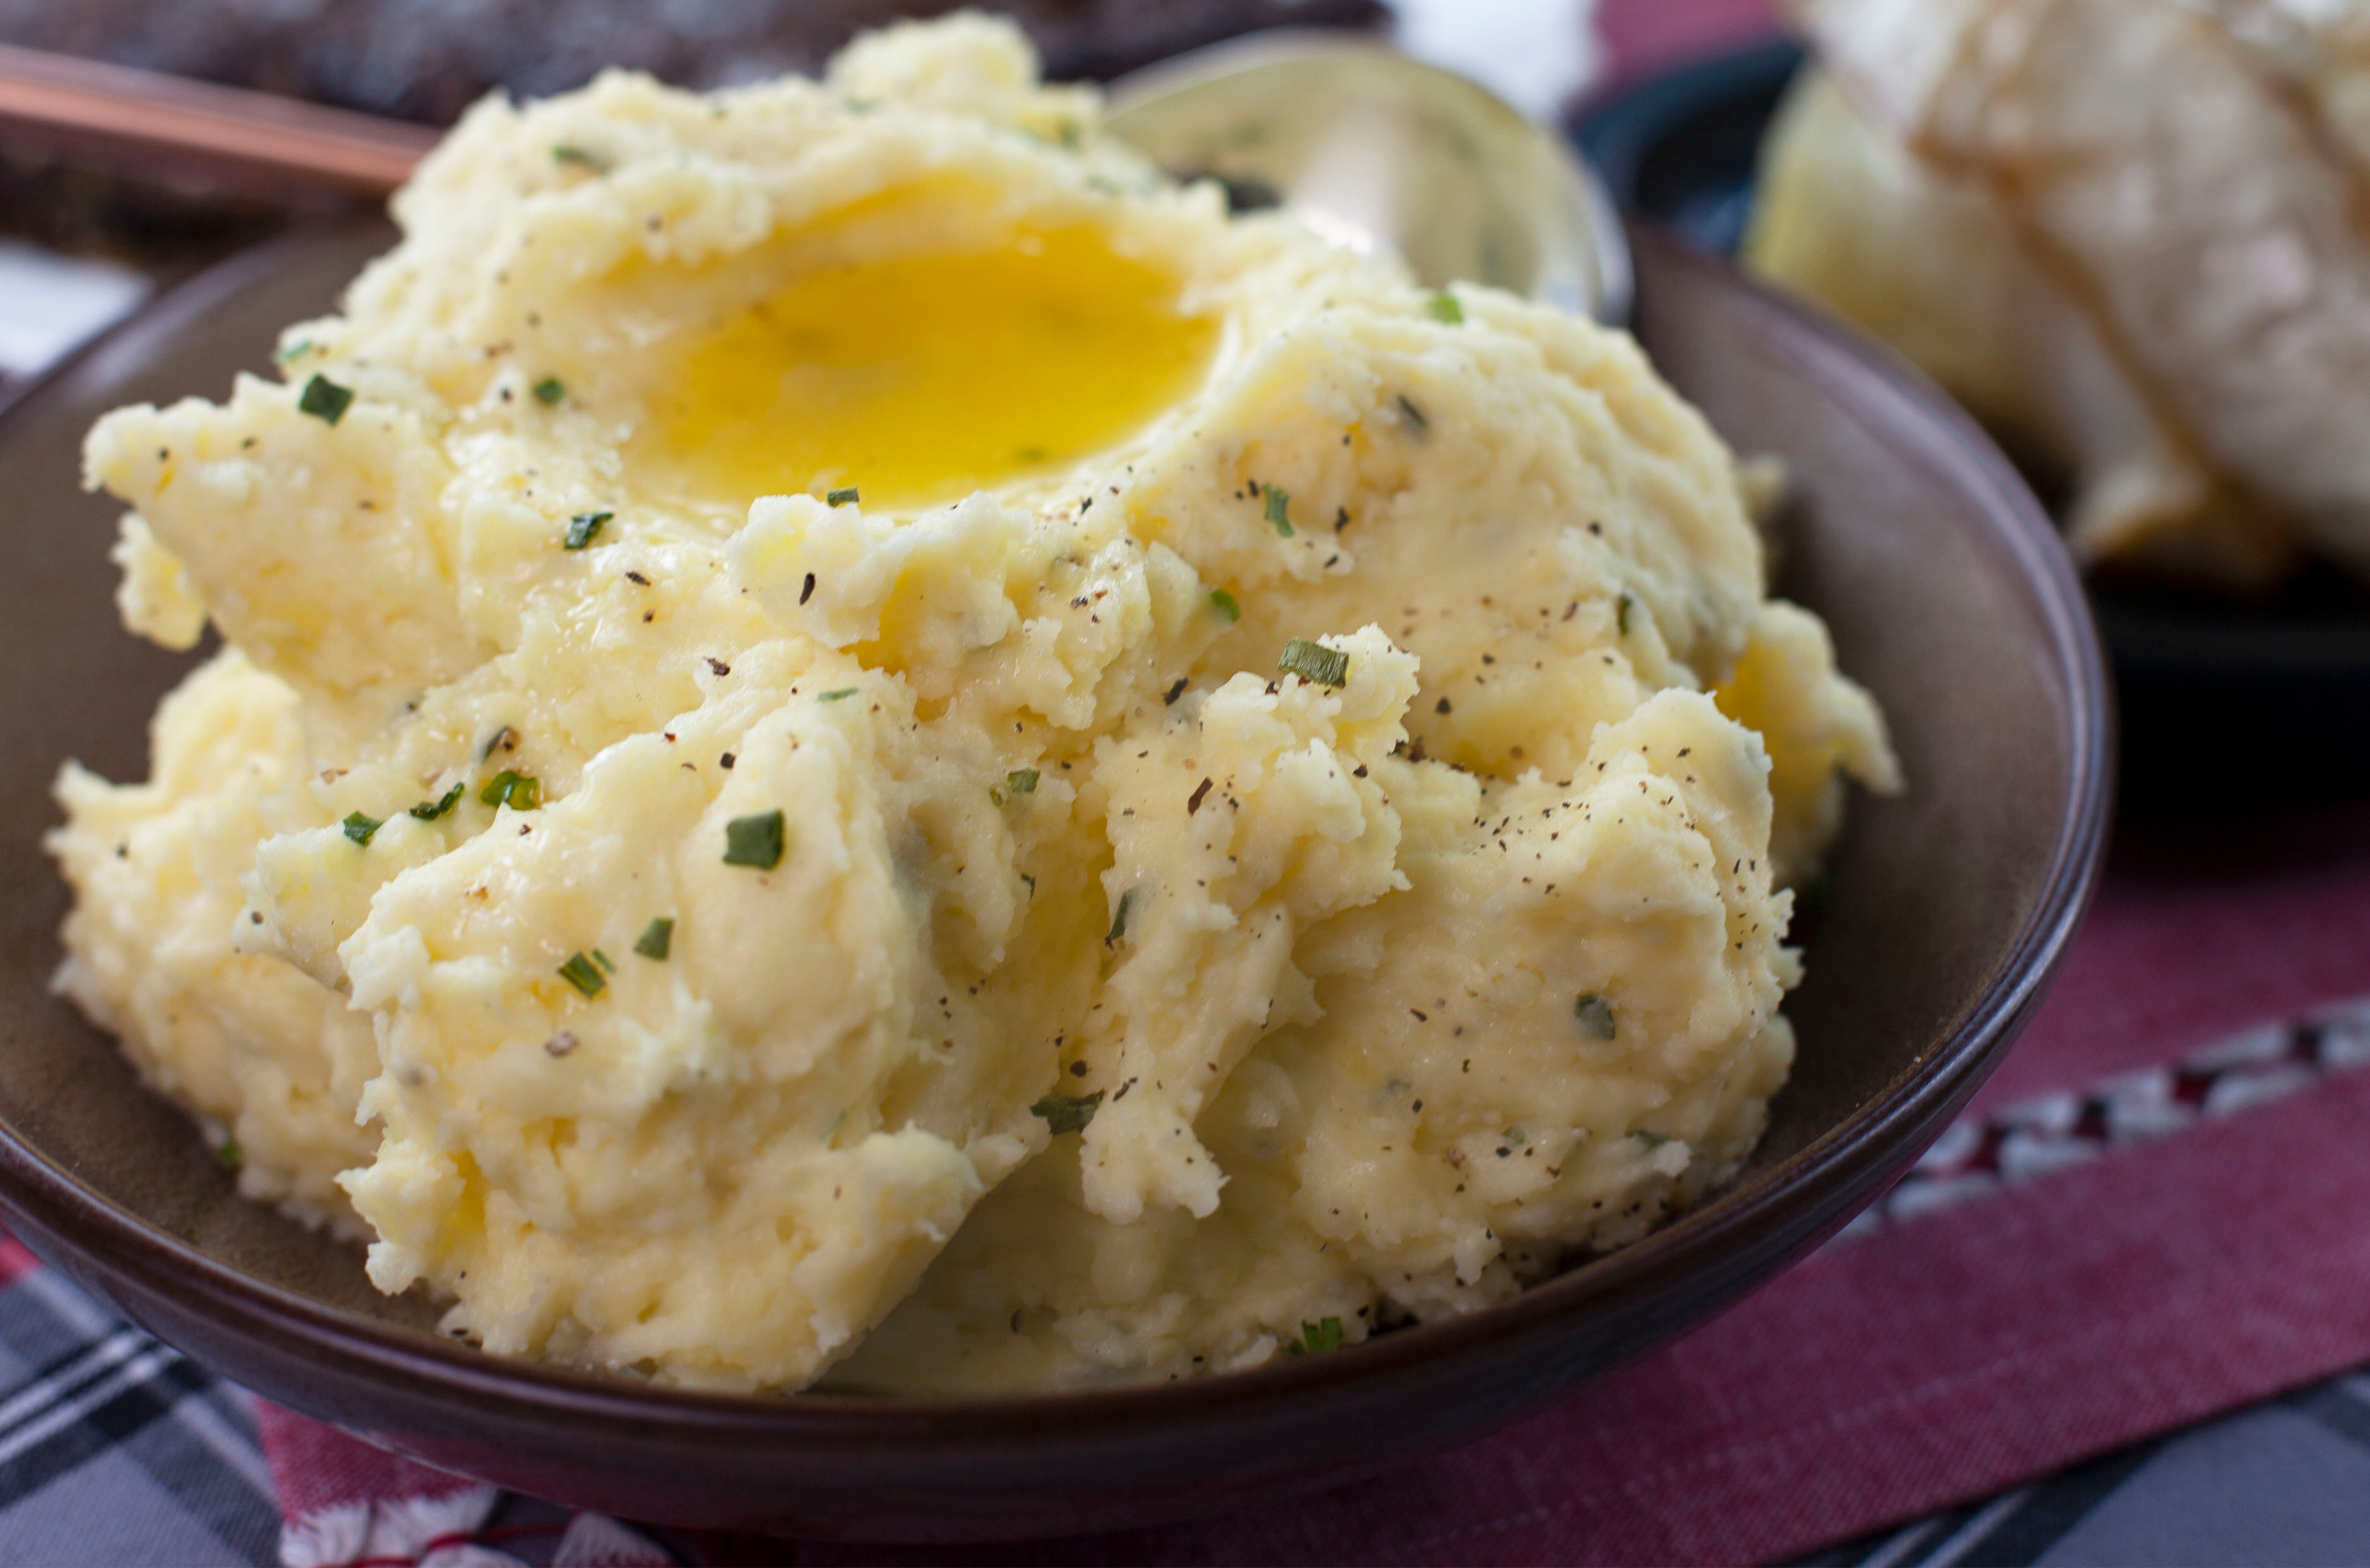 Creamy dreamy mashed spuds